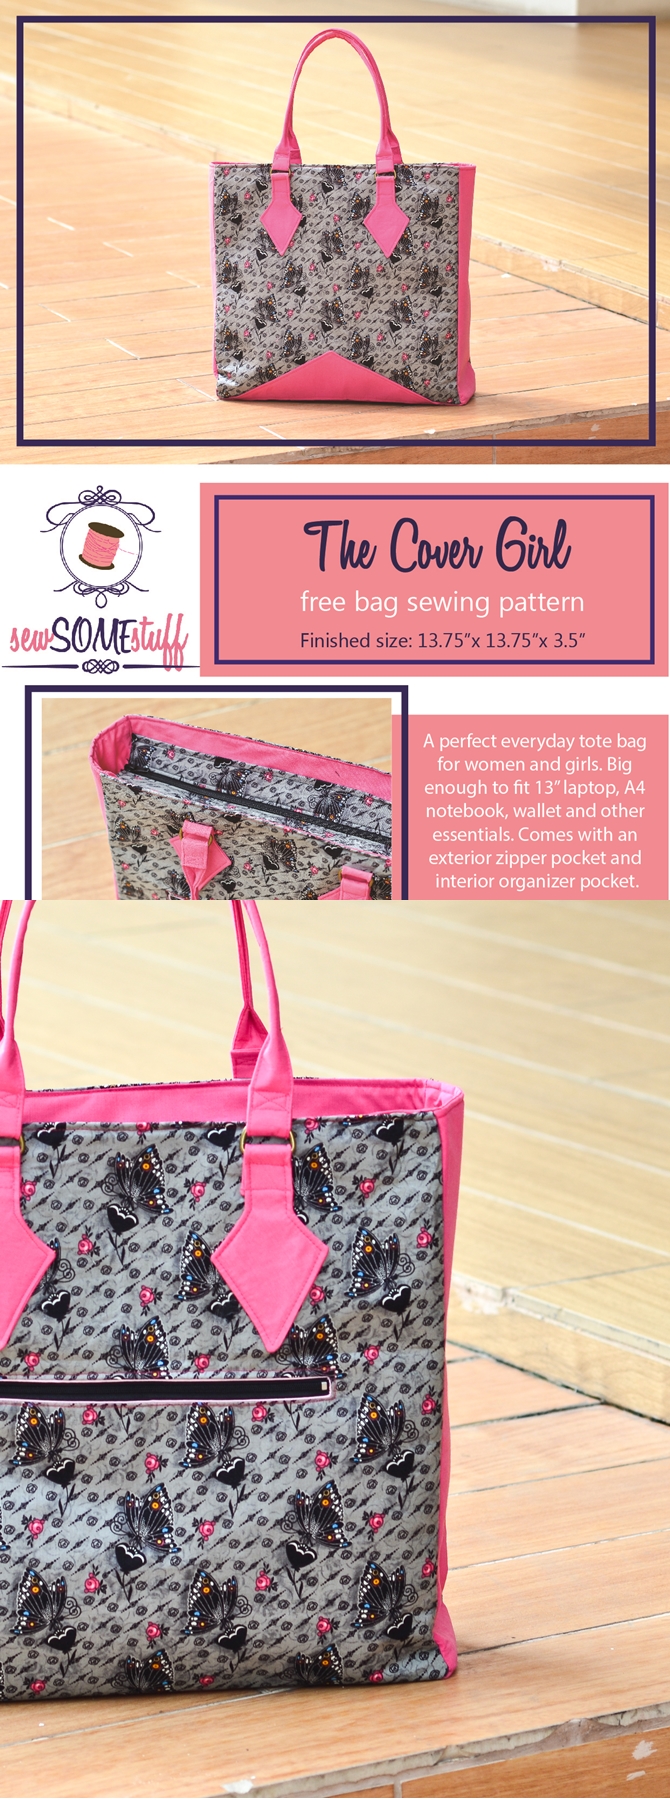 The Cover Girl - FREE bag sewing pattern for a large size tote bag. Great gift to sew!